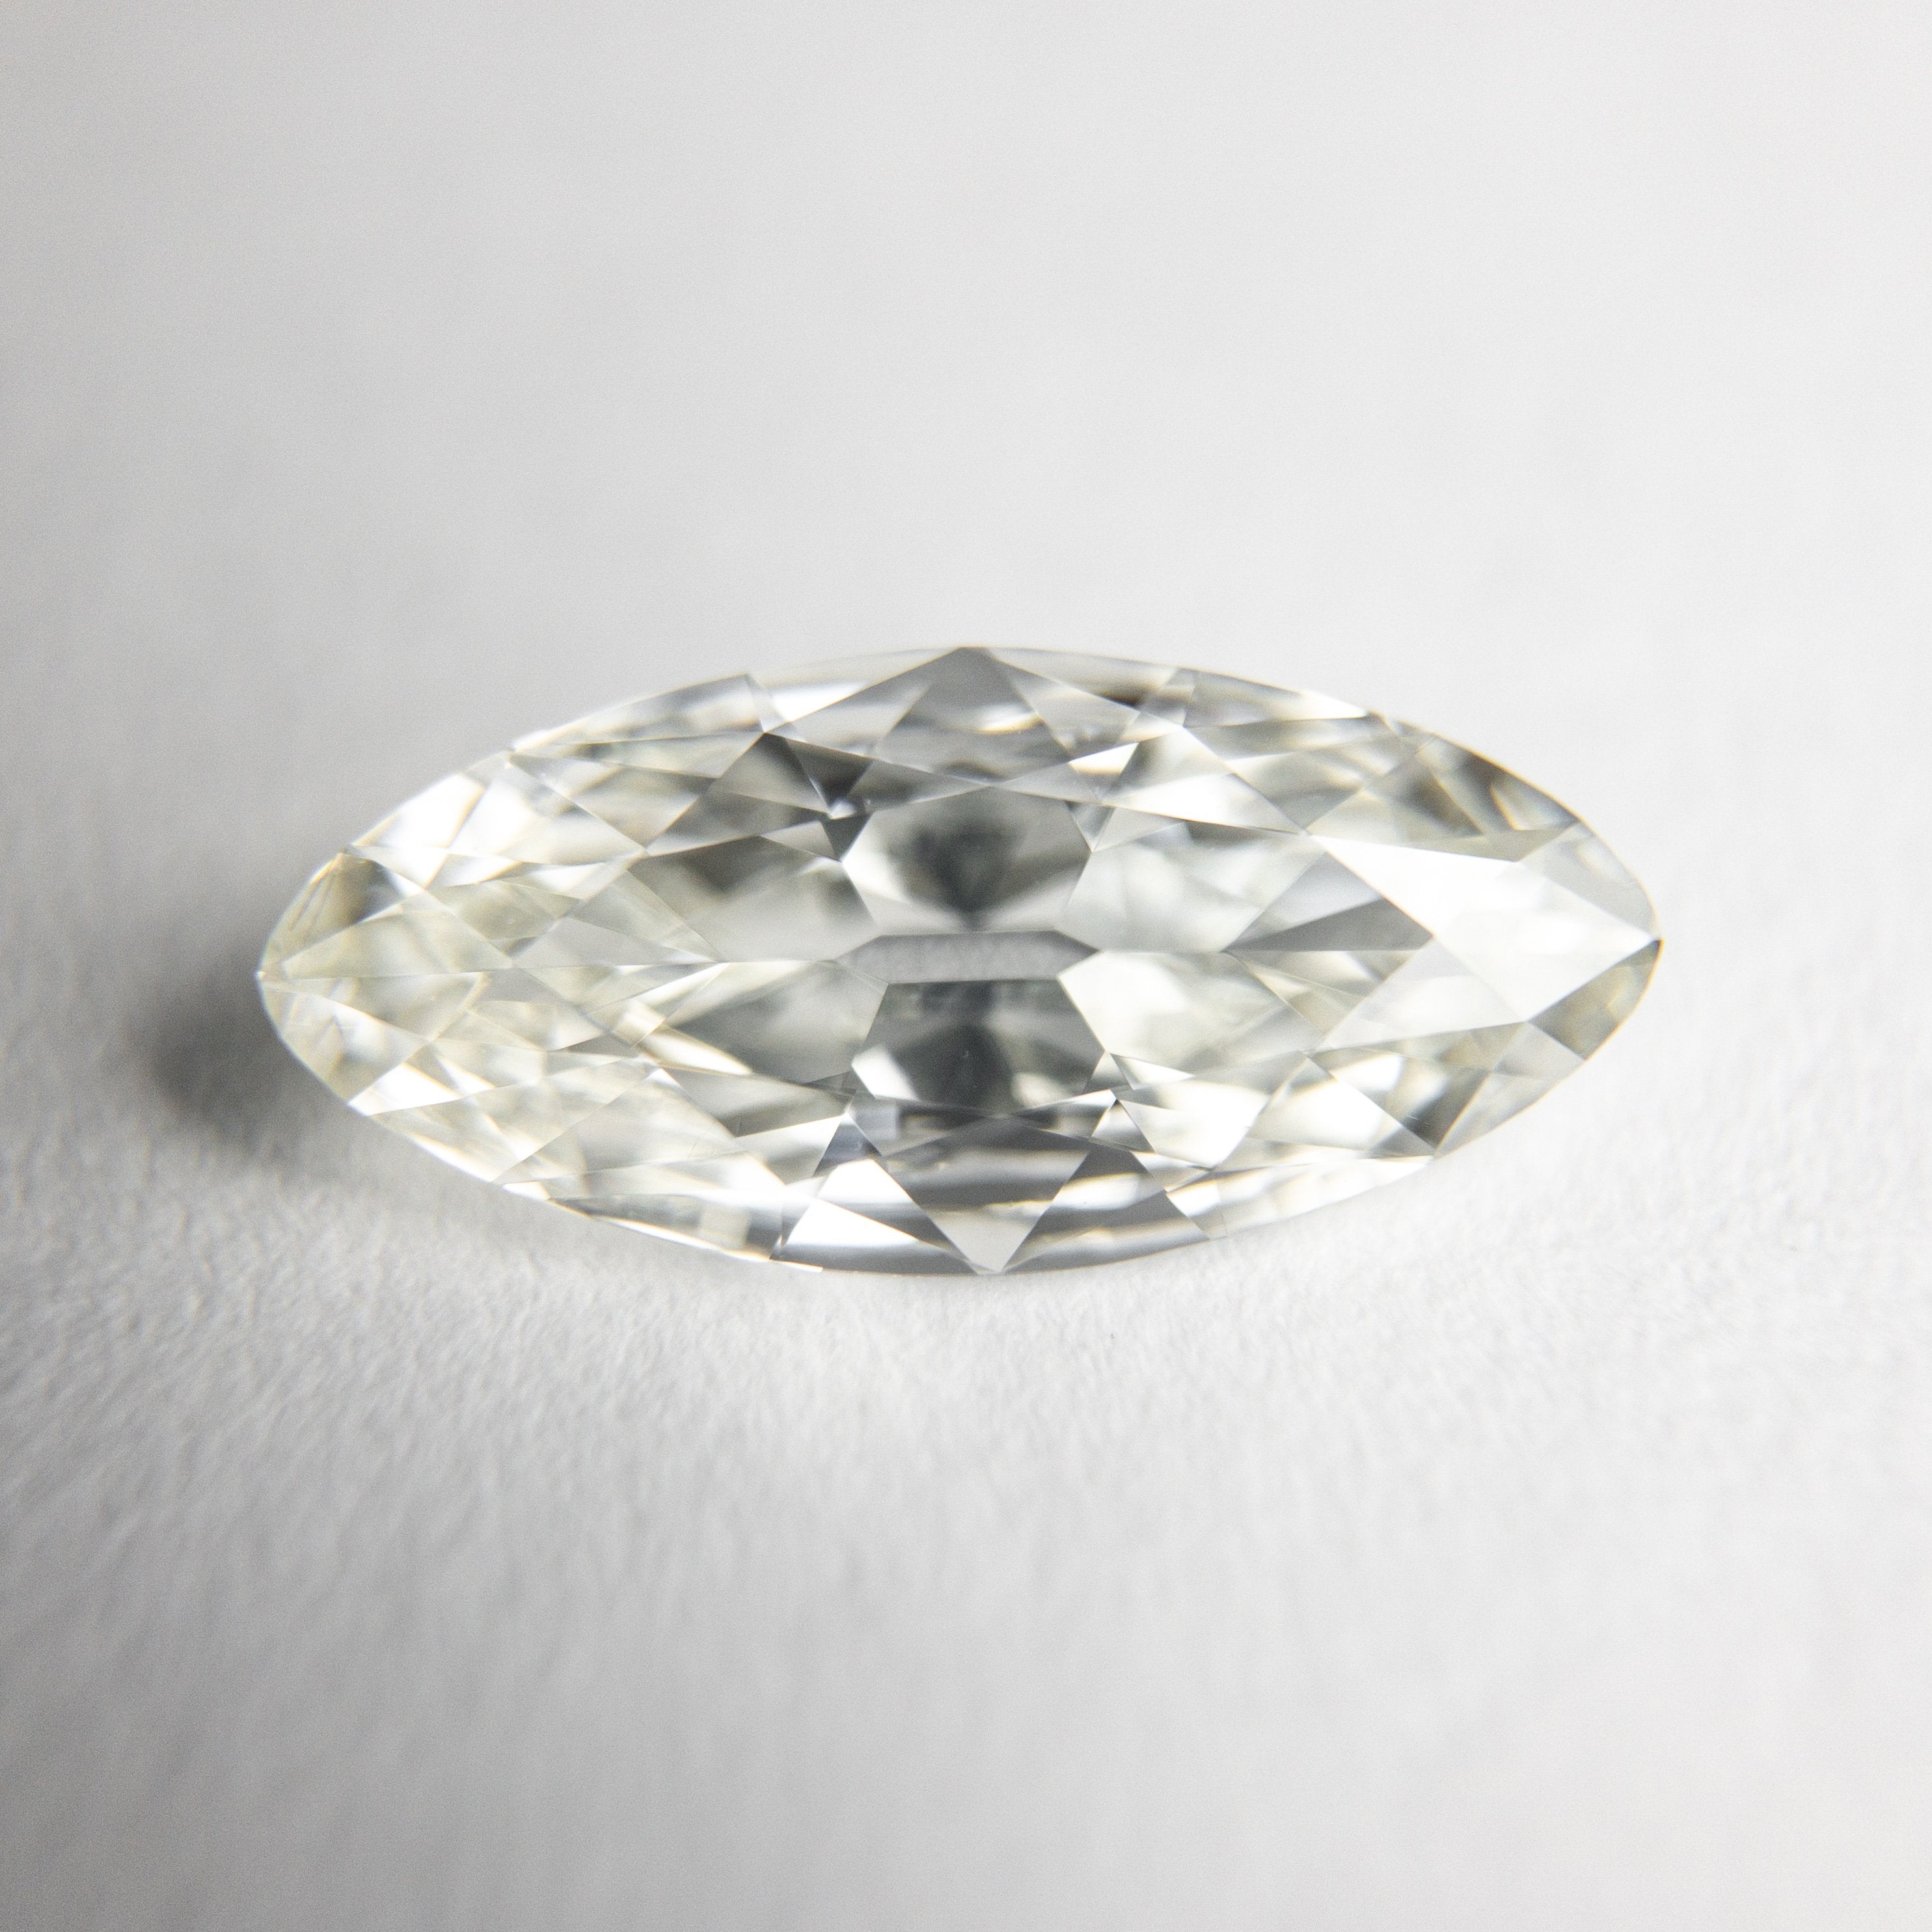 1.00ct 11.13x5.15x2.43mm VS2/SI1 H-I Moval Modern Antique Cut 18349-02 HOLD D1266 10/30/20